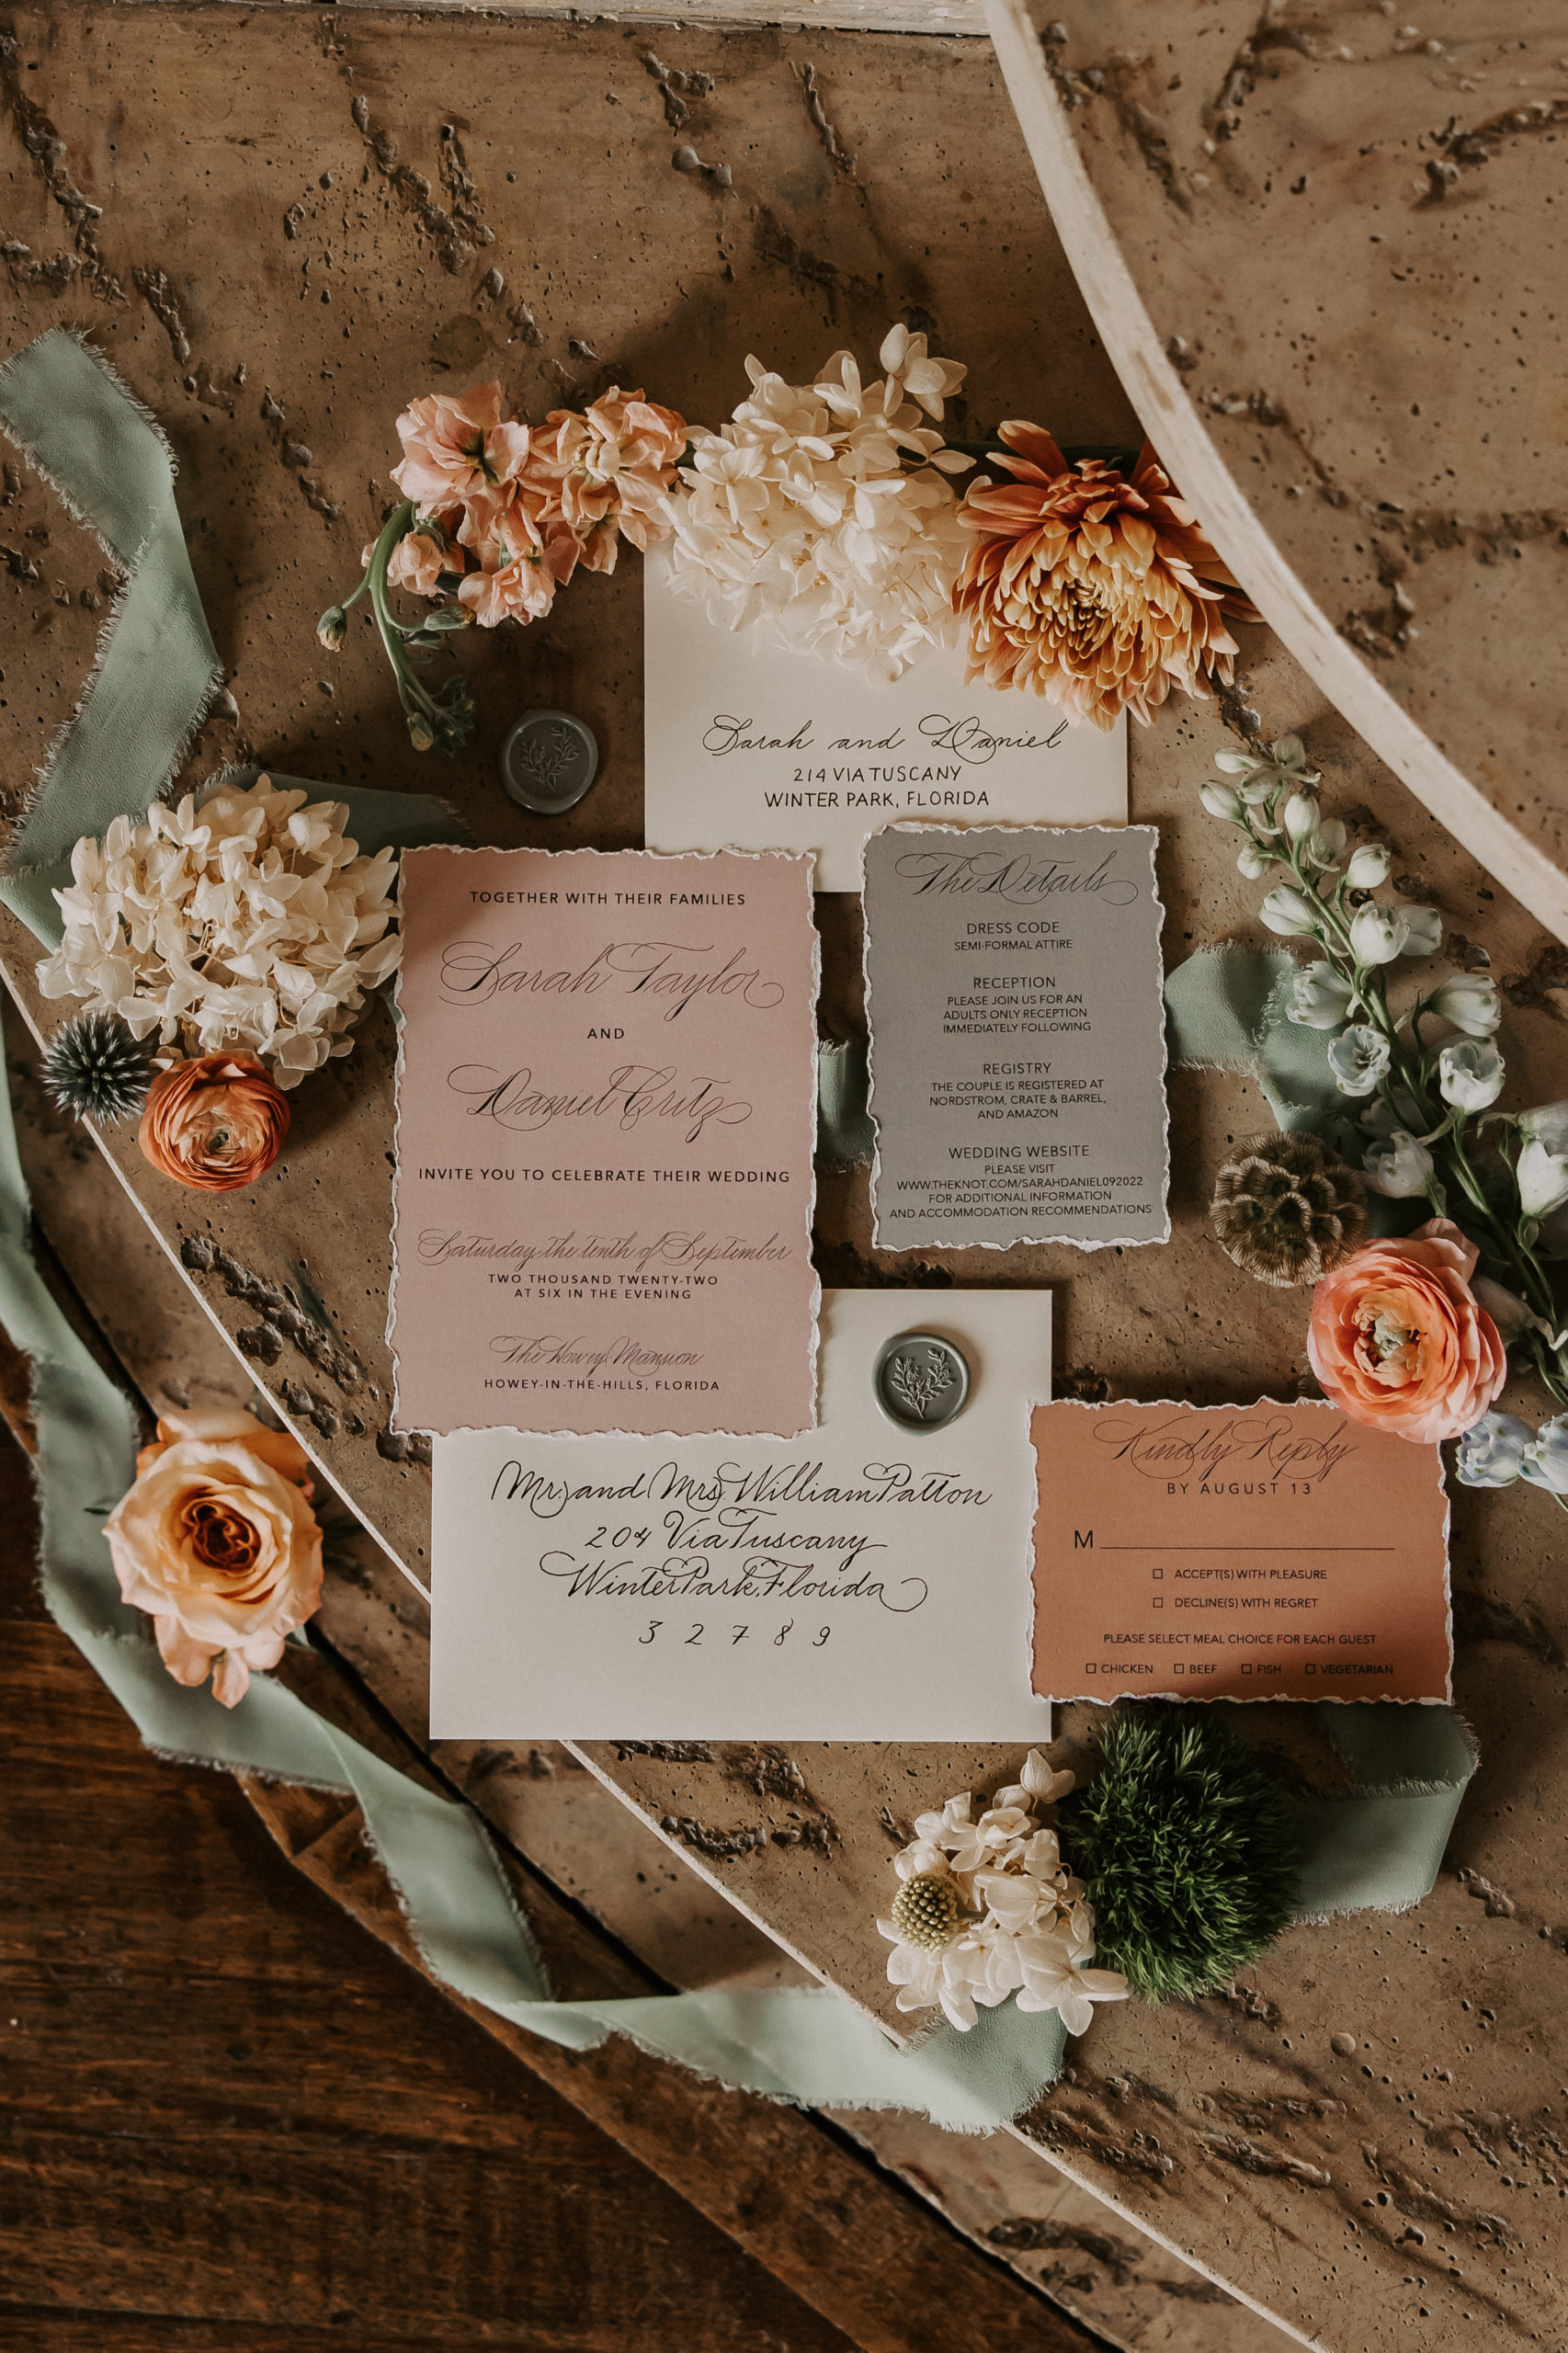 This stunning invitation suite concentrated on the “middle of the muted rainbow” hues like peach, yellows, dusty blues and sage greens, trying not to focus solely on one color.